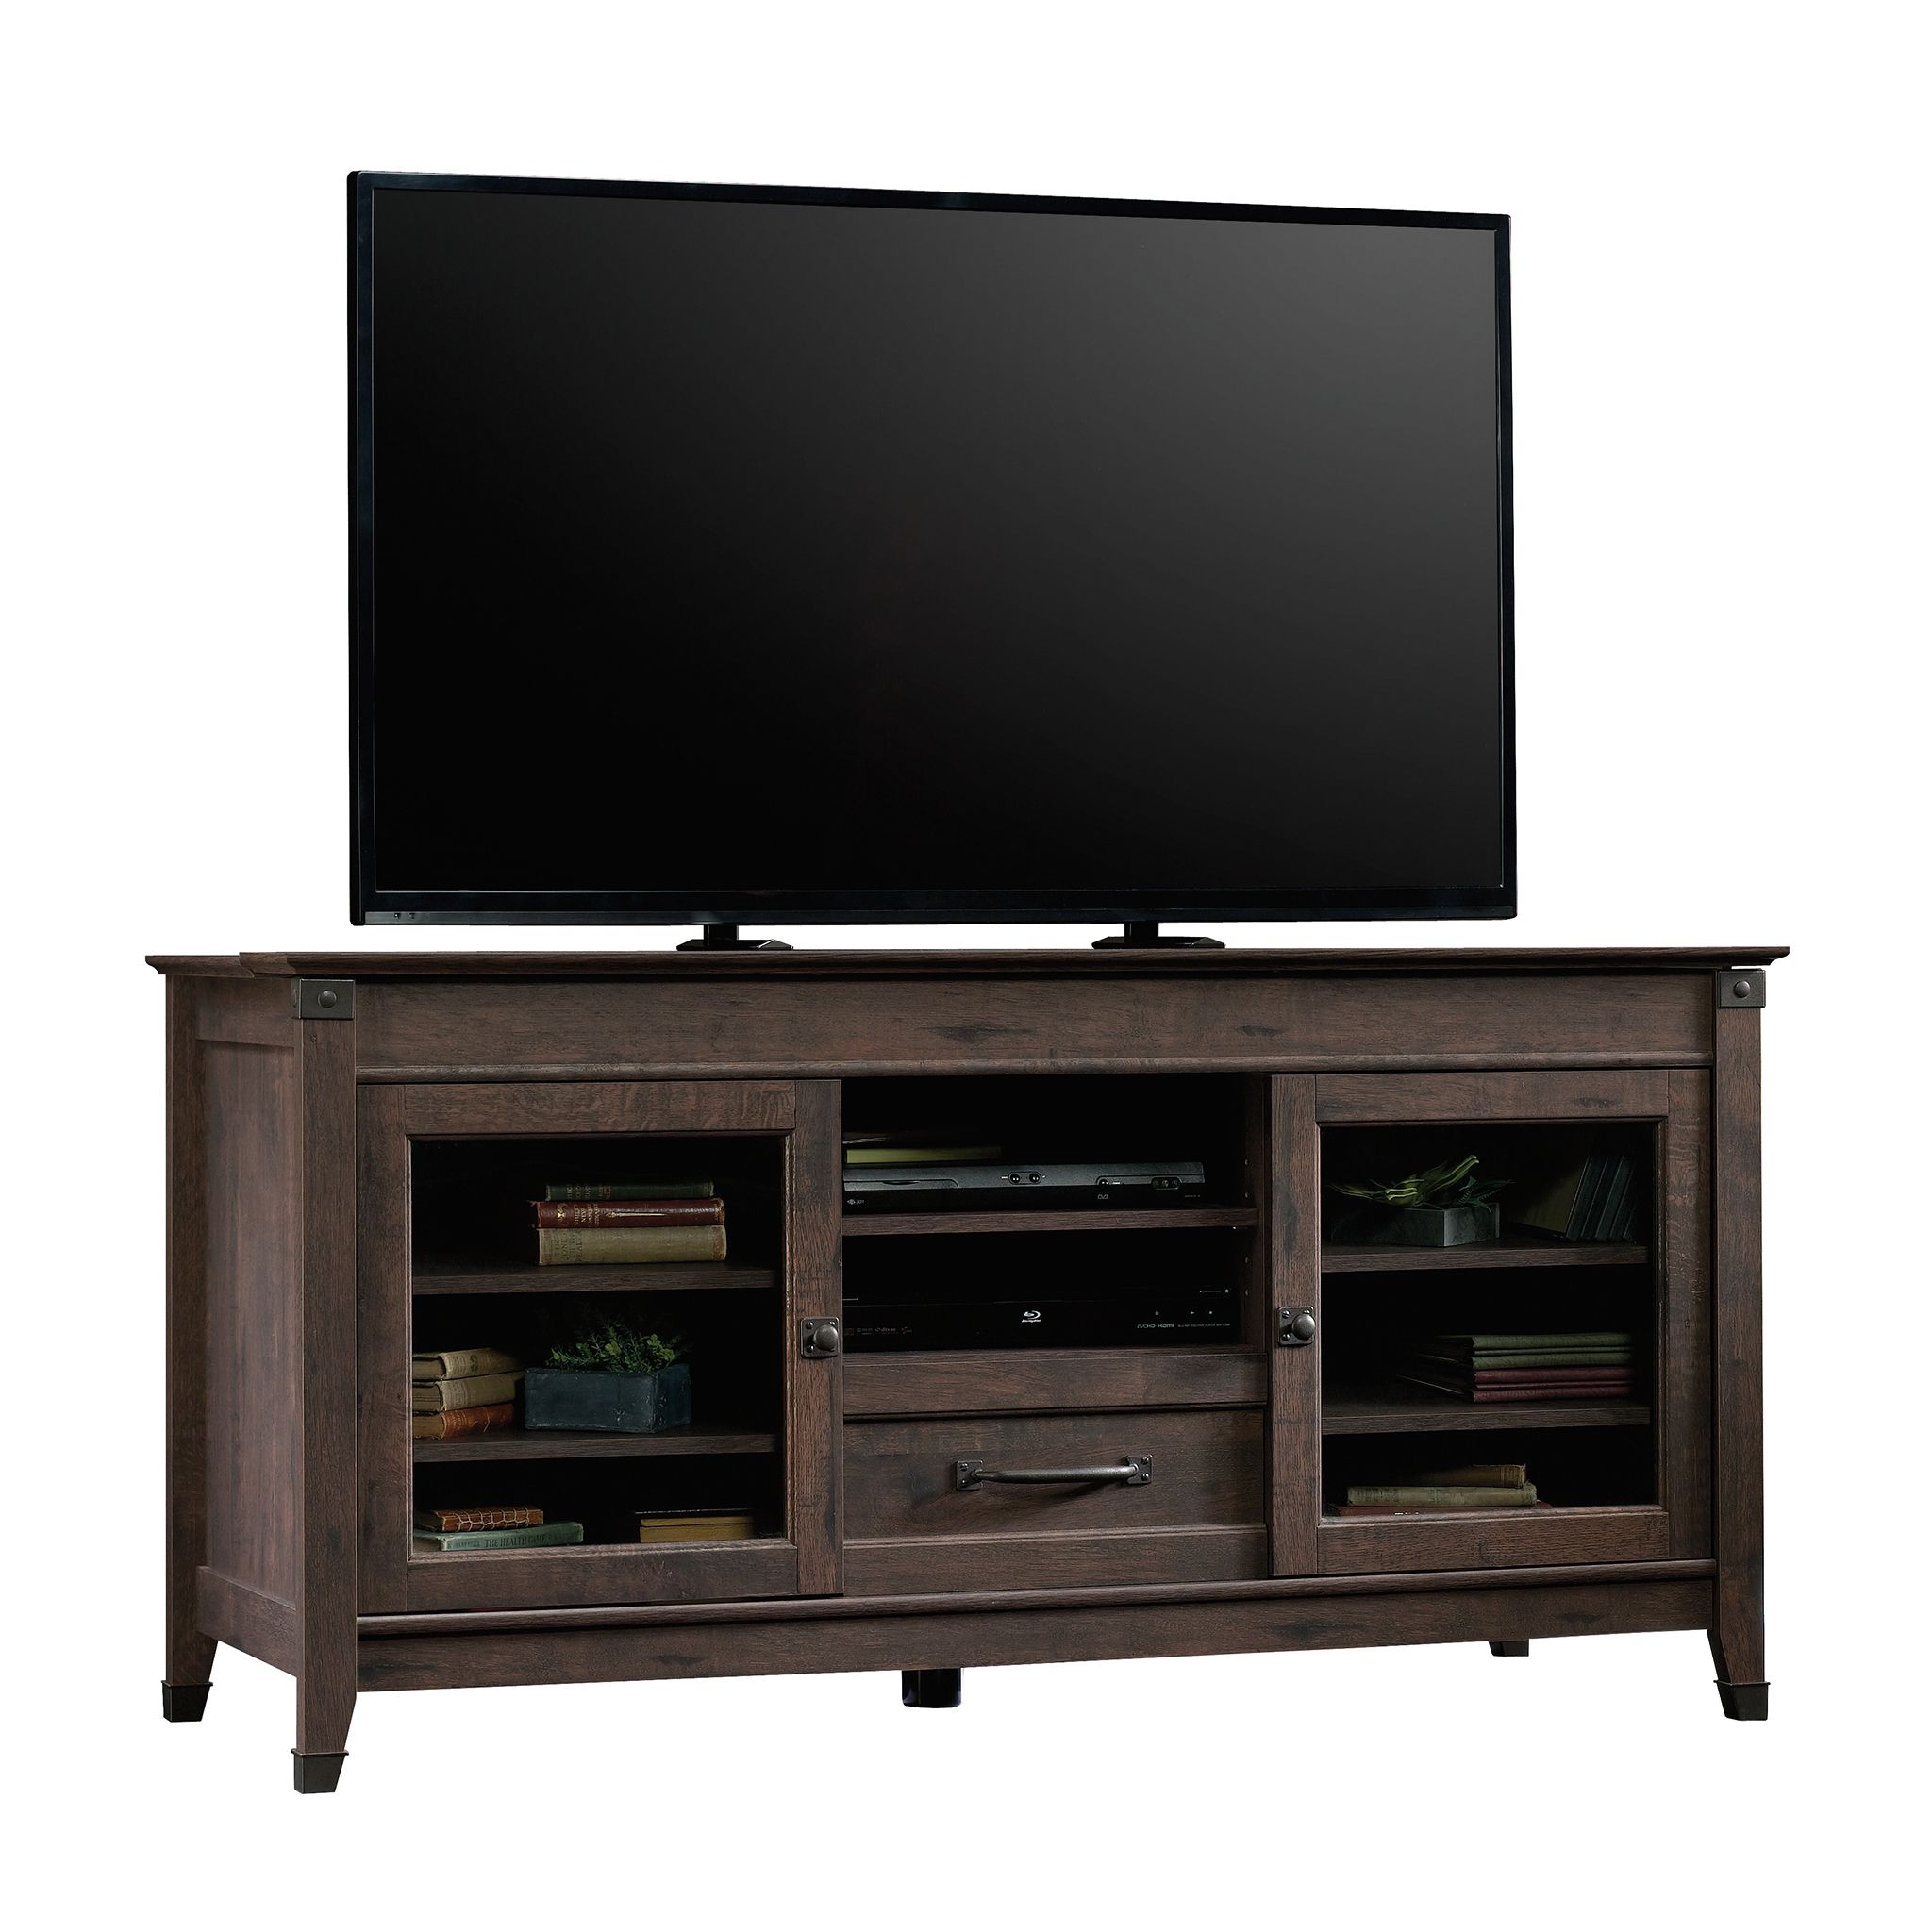 Sauder Carson Forge Tv Stand For Tvs Up To 60", Coffee Oak With 60" Corner Tv Stands Washed Oak (View 10 of 15)